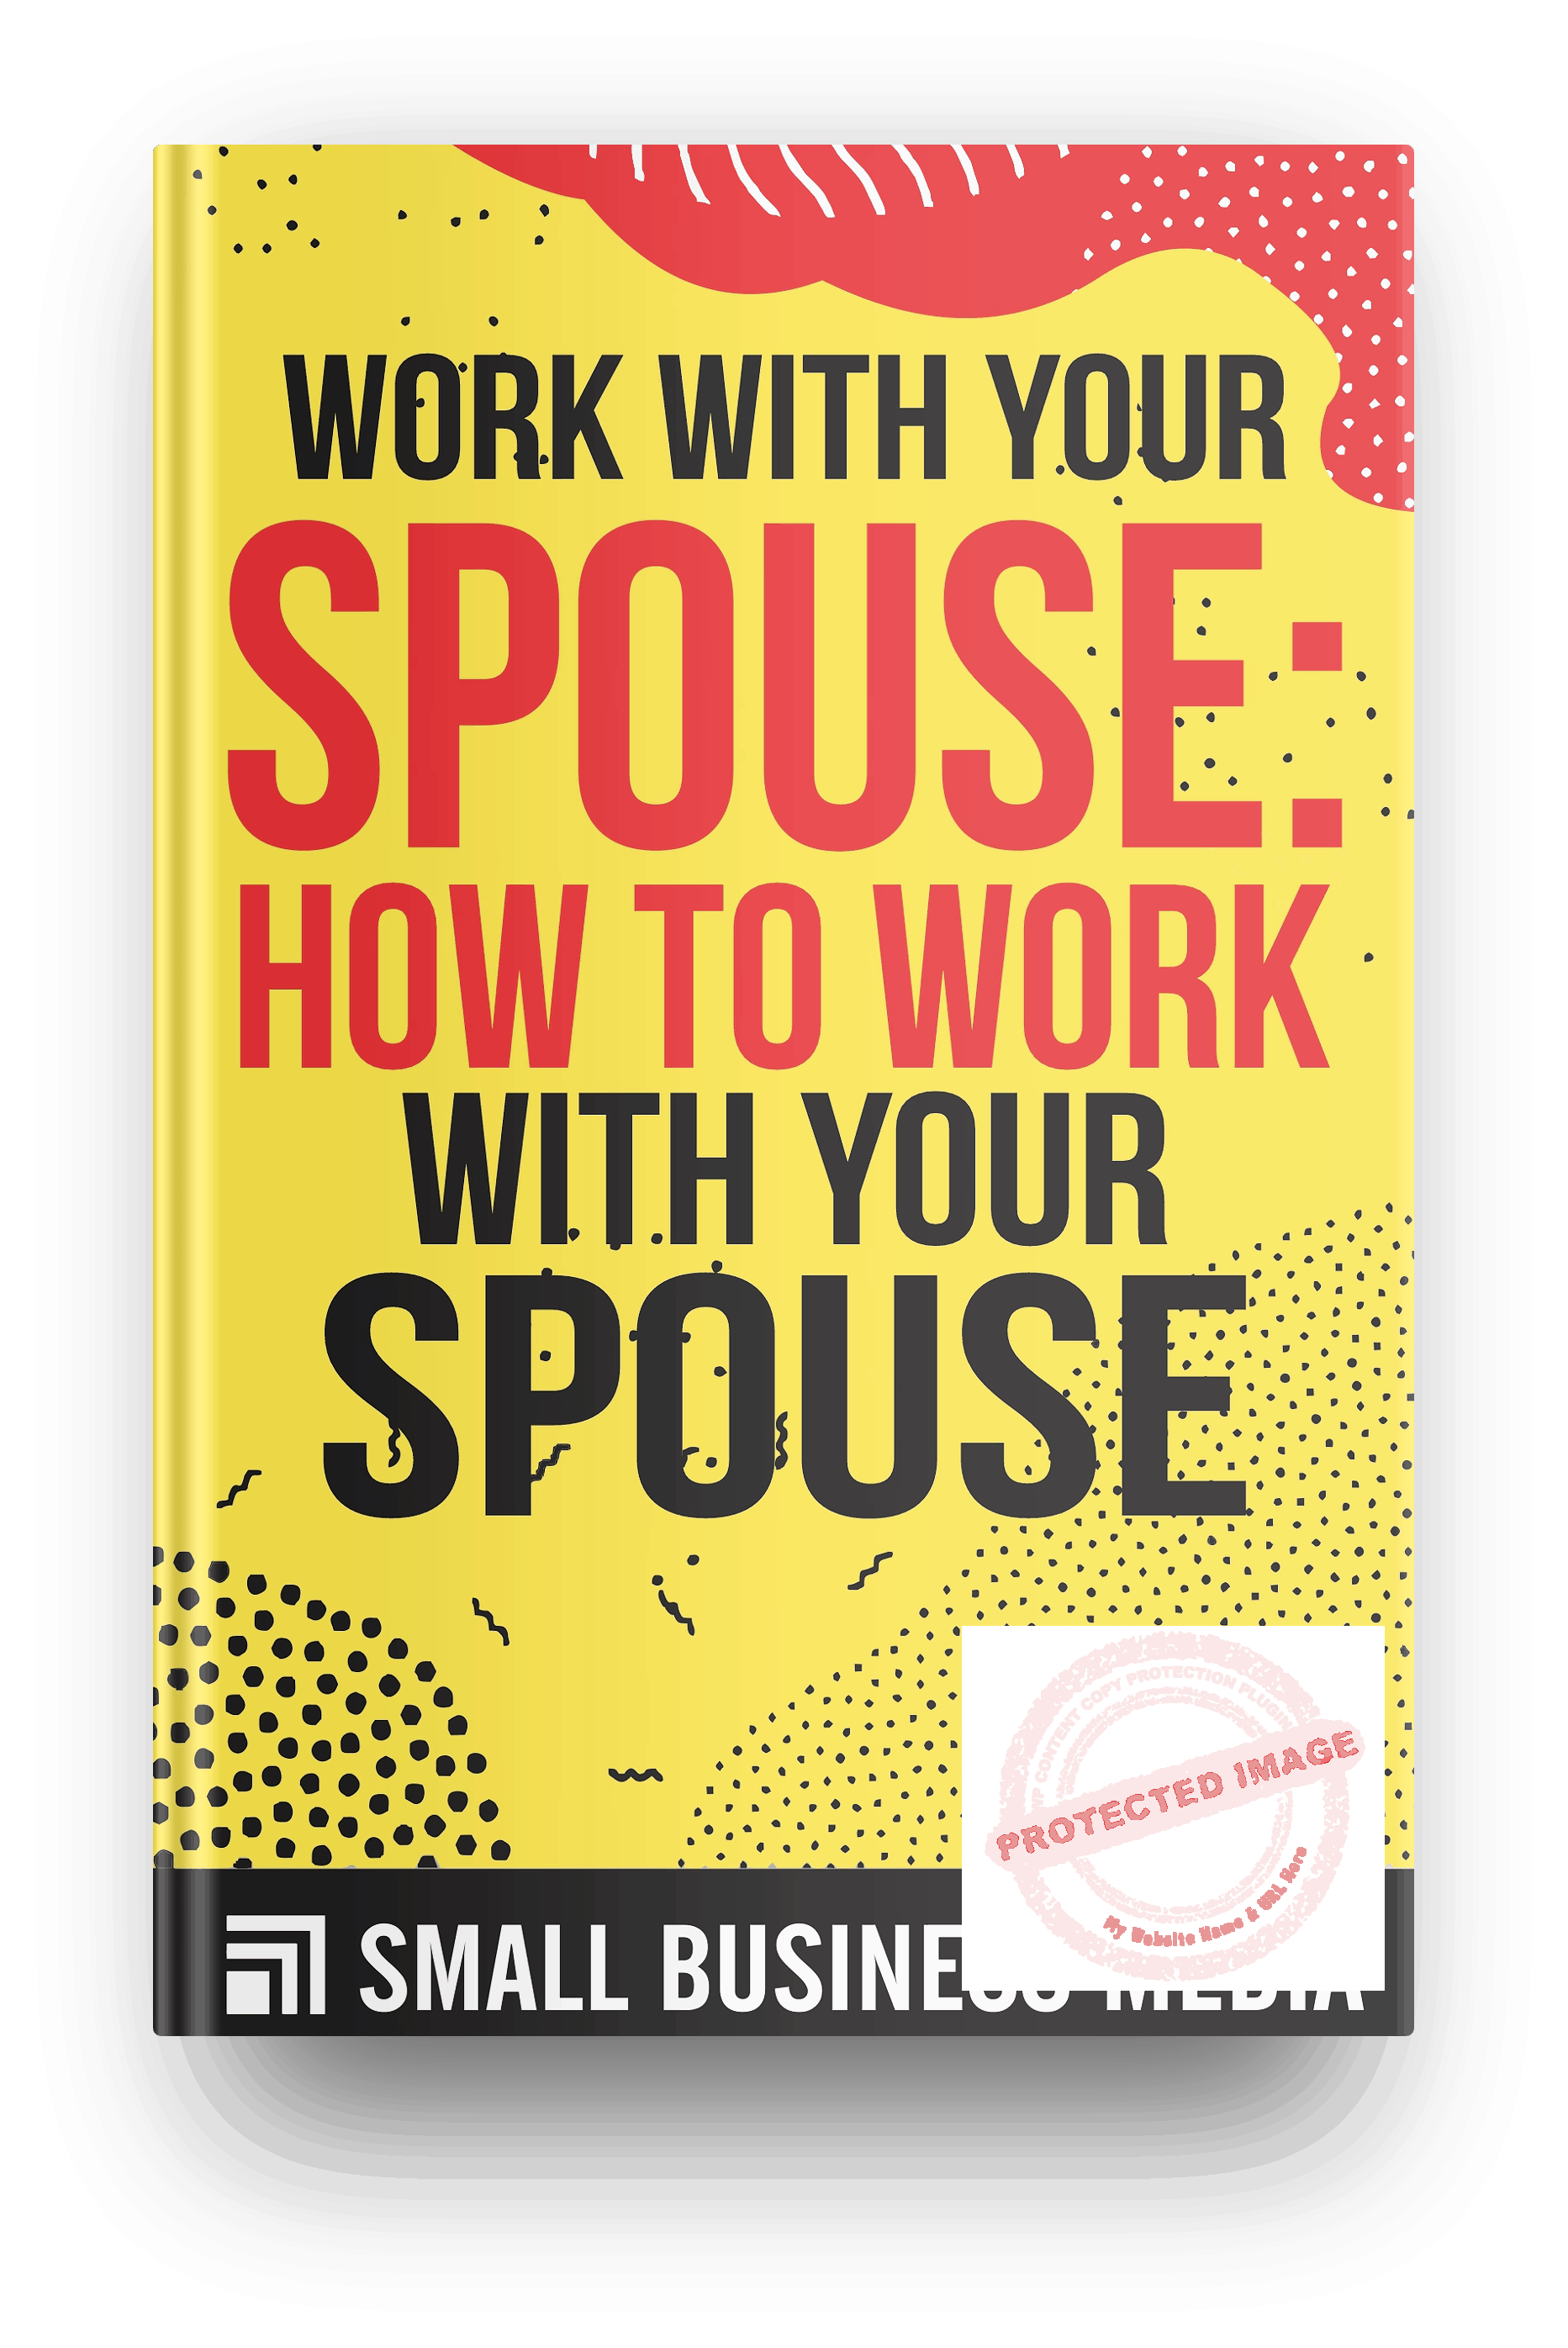 Work with your spouse: how to work with your spouse